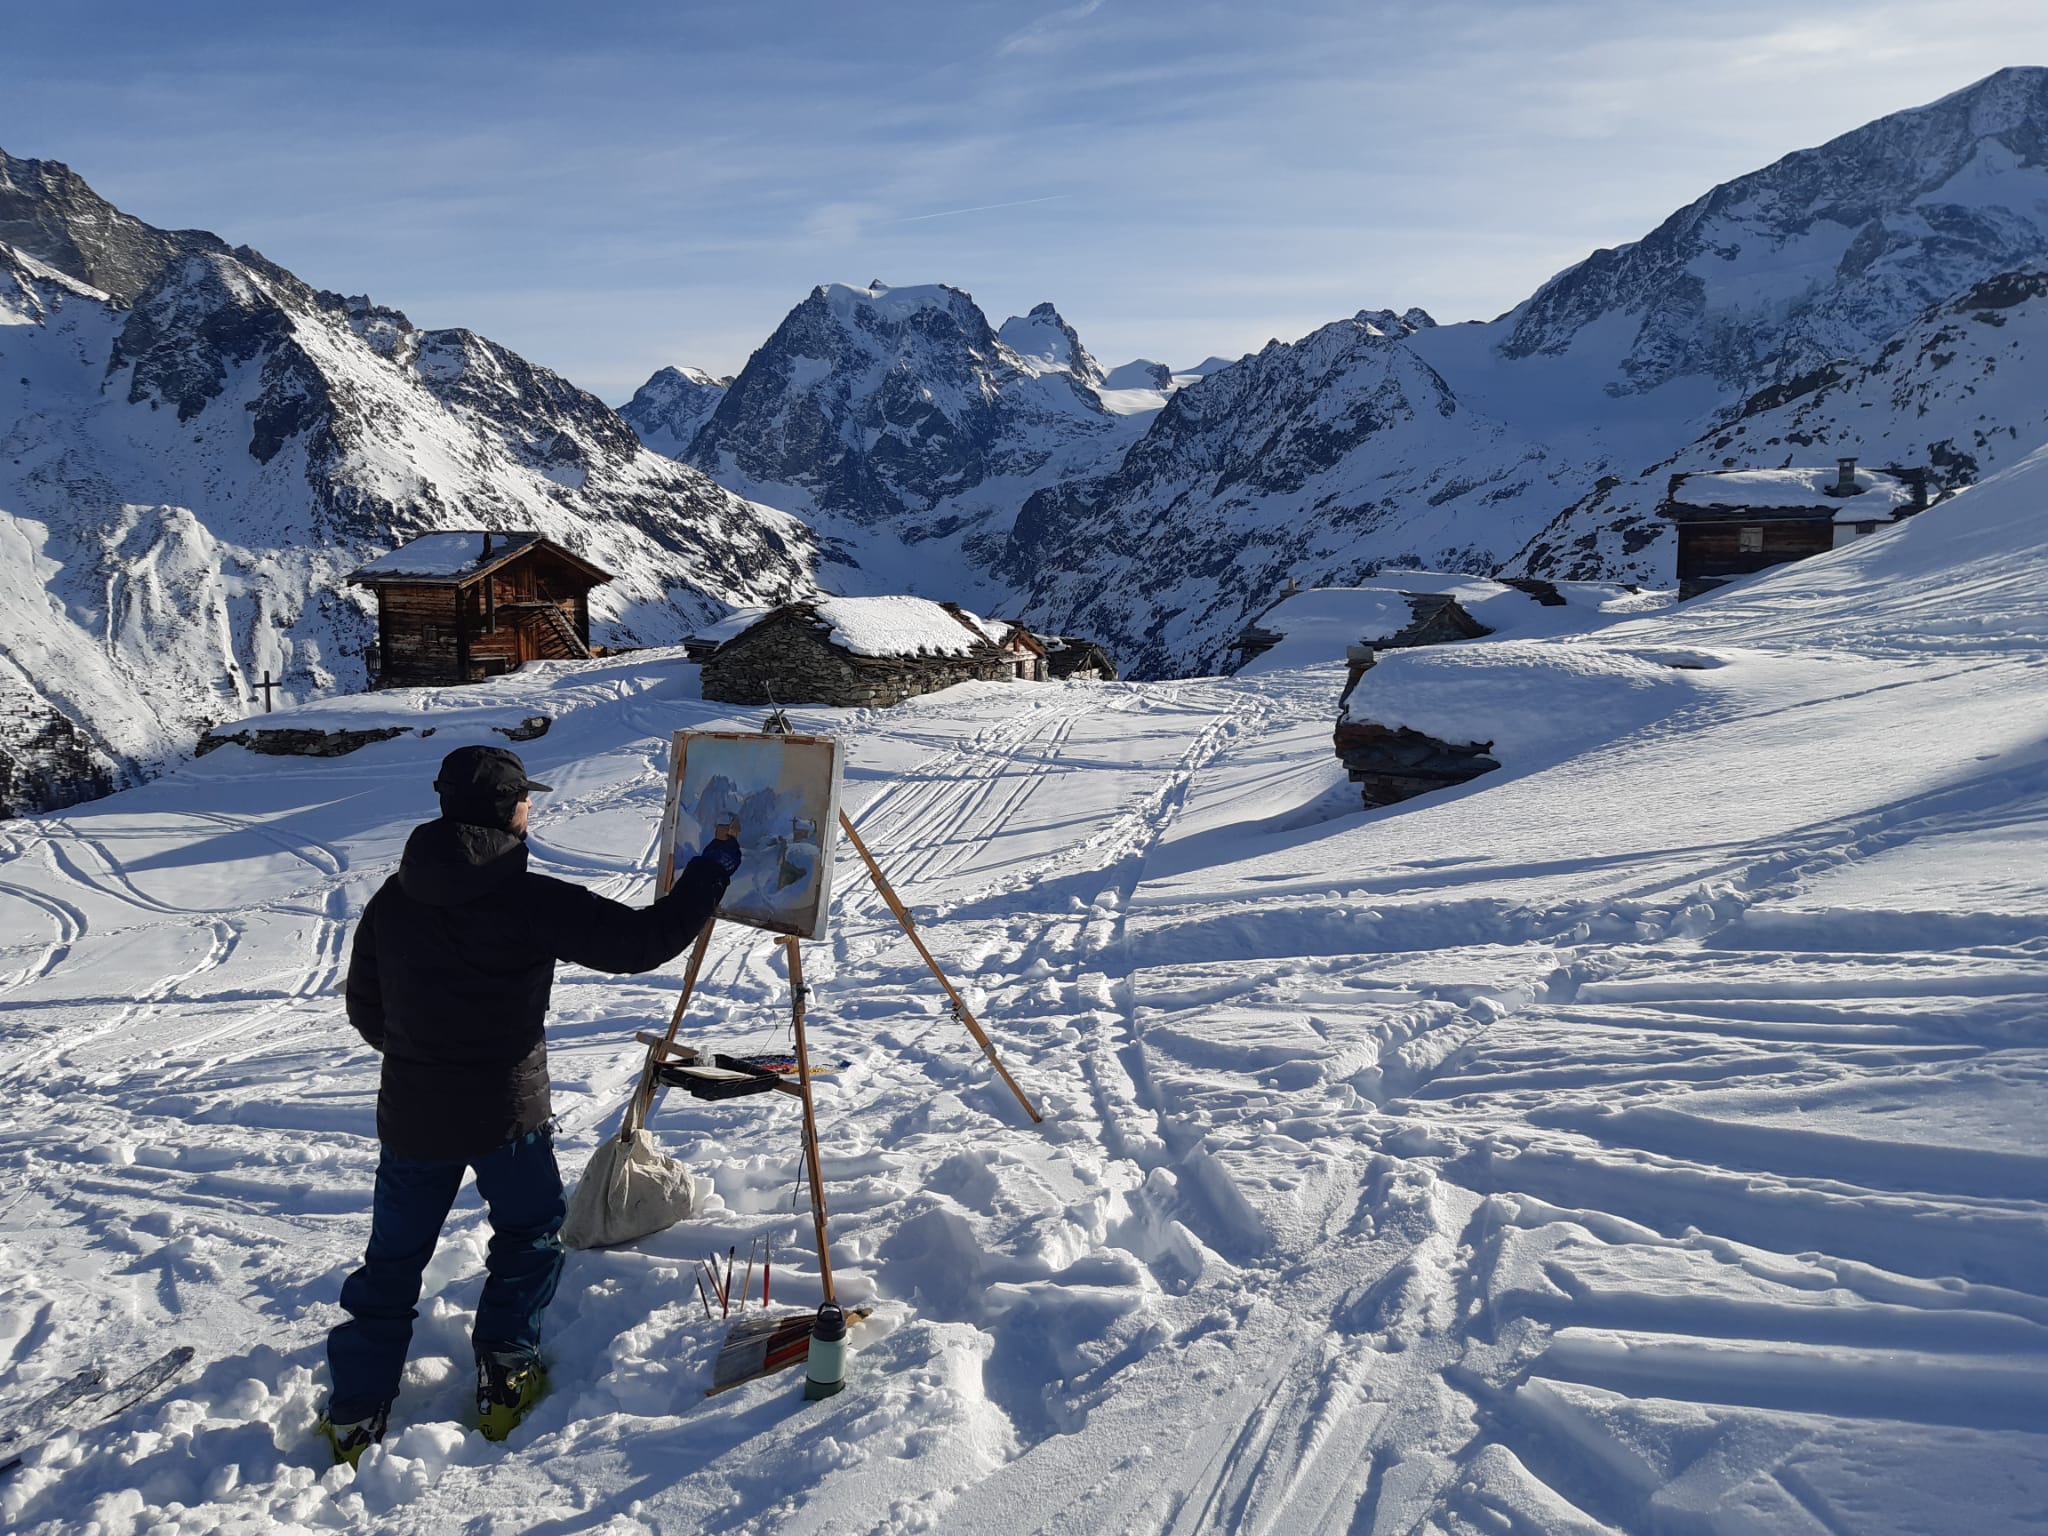 Daniel J Yeomans painting in the mountains